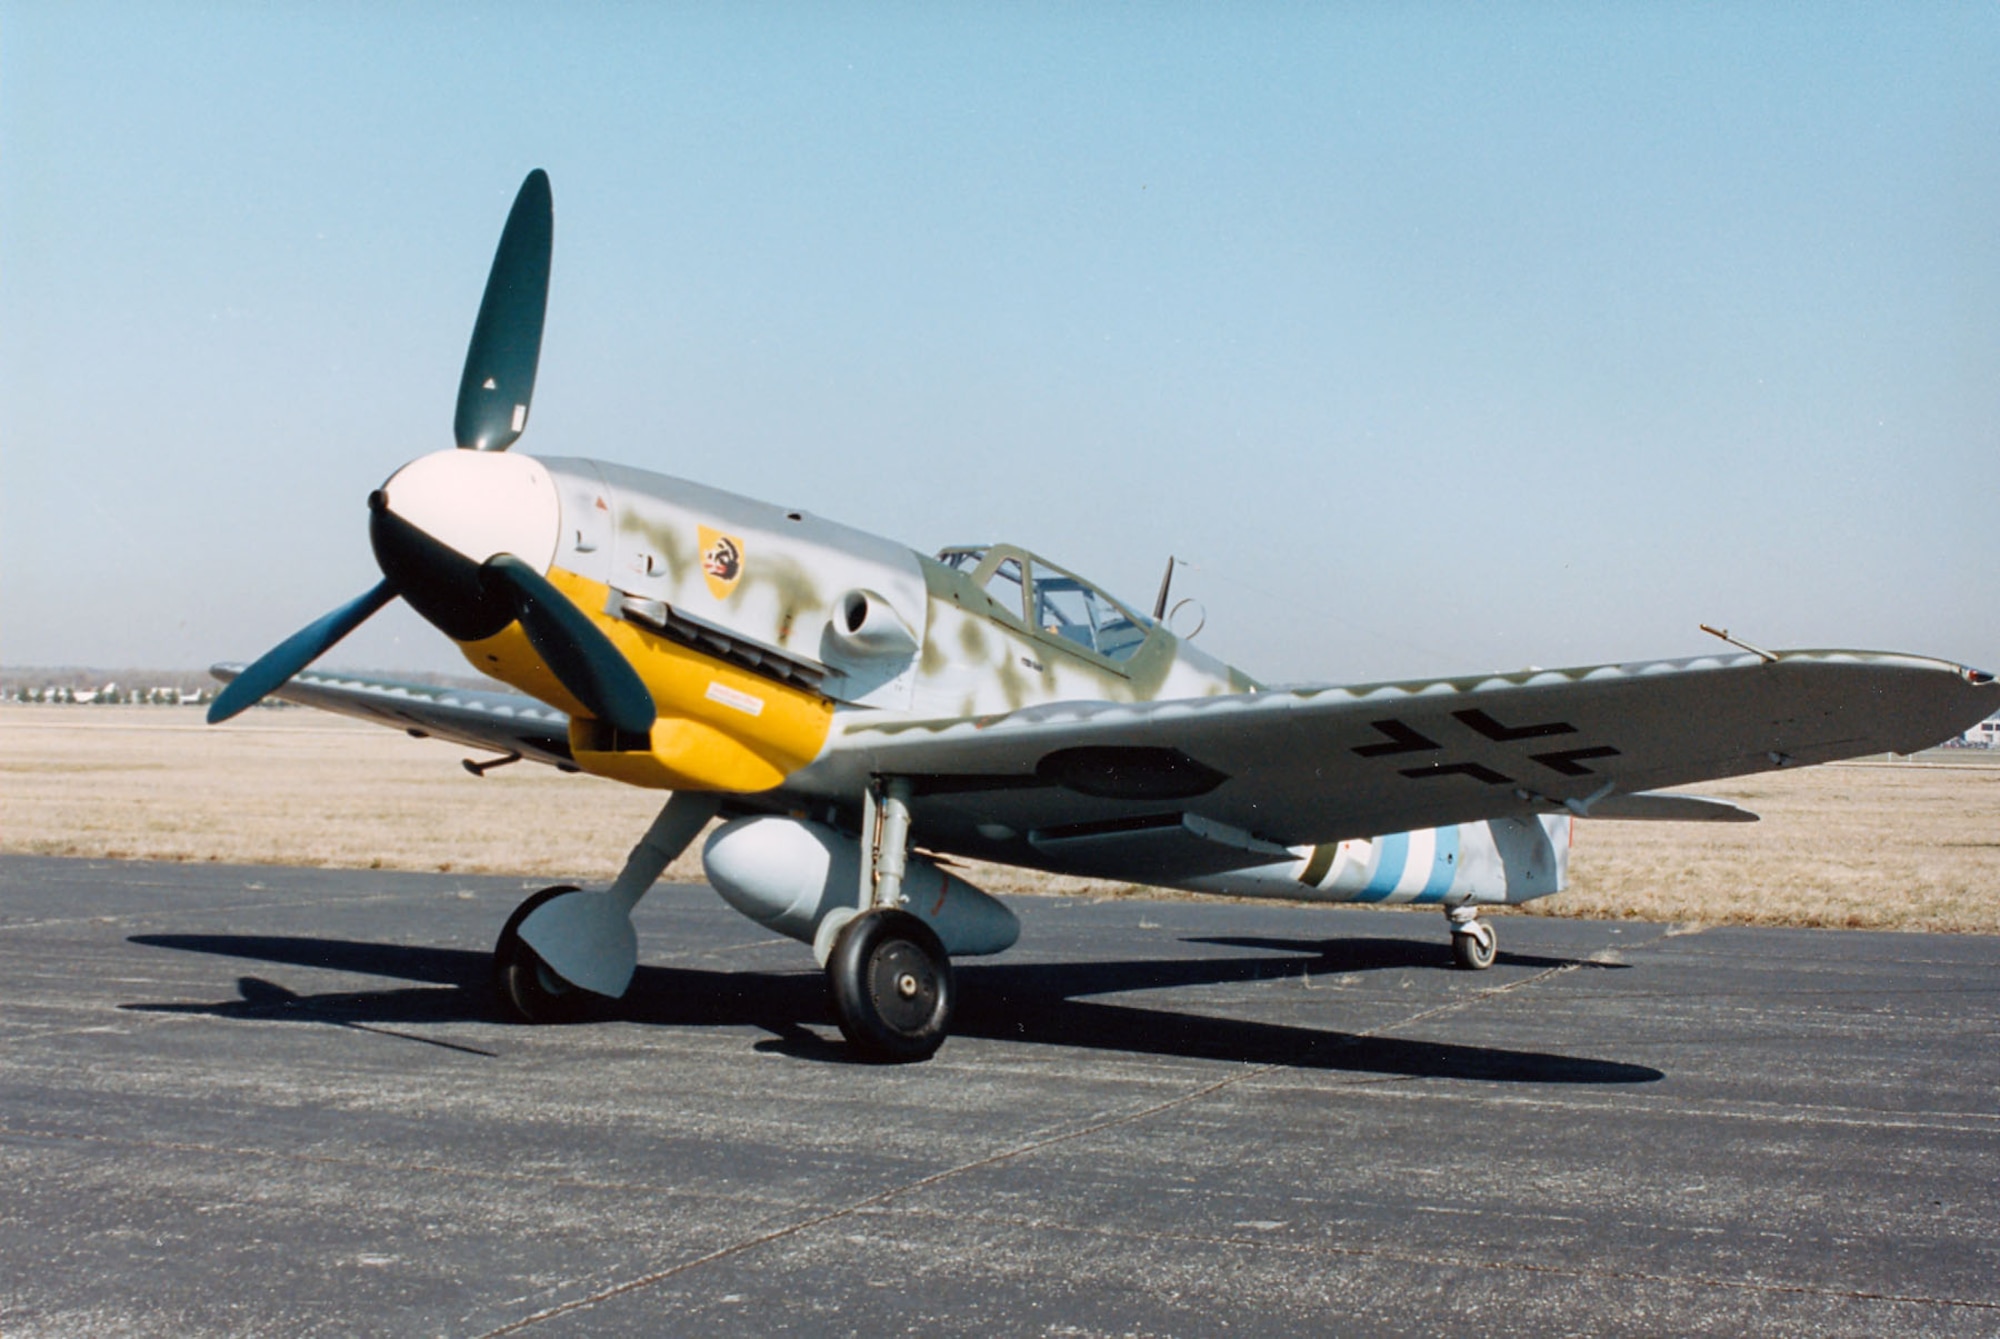 DAYTON, Ohio -- Messerschmitt Bf 109G-10 at the National Museum of the United States Air Force. (U.S. Air Force photo)